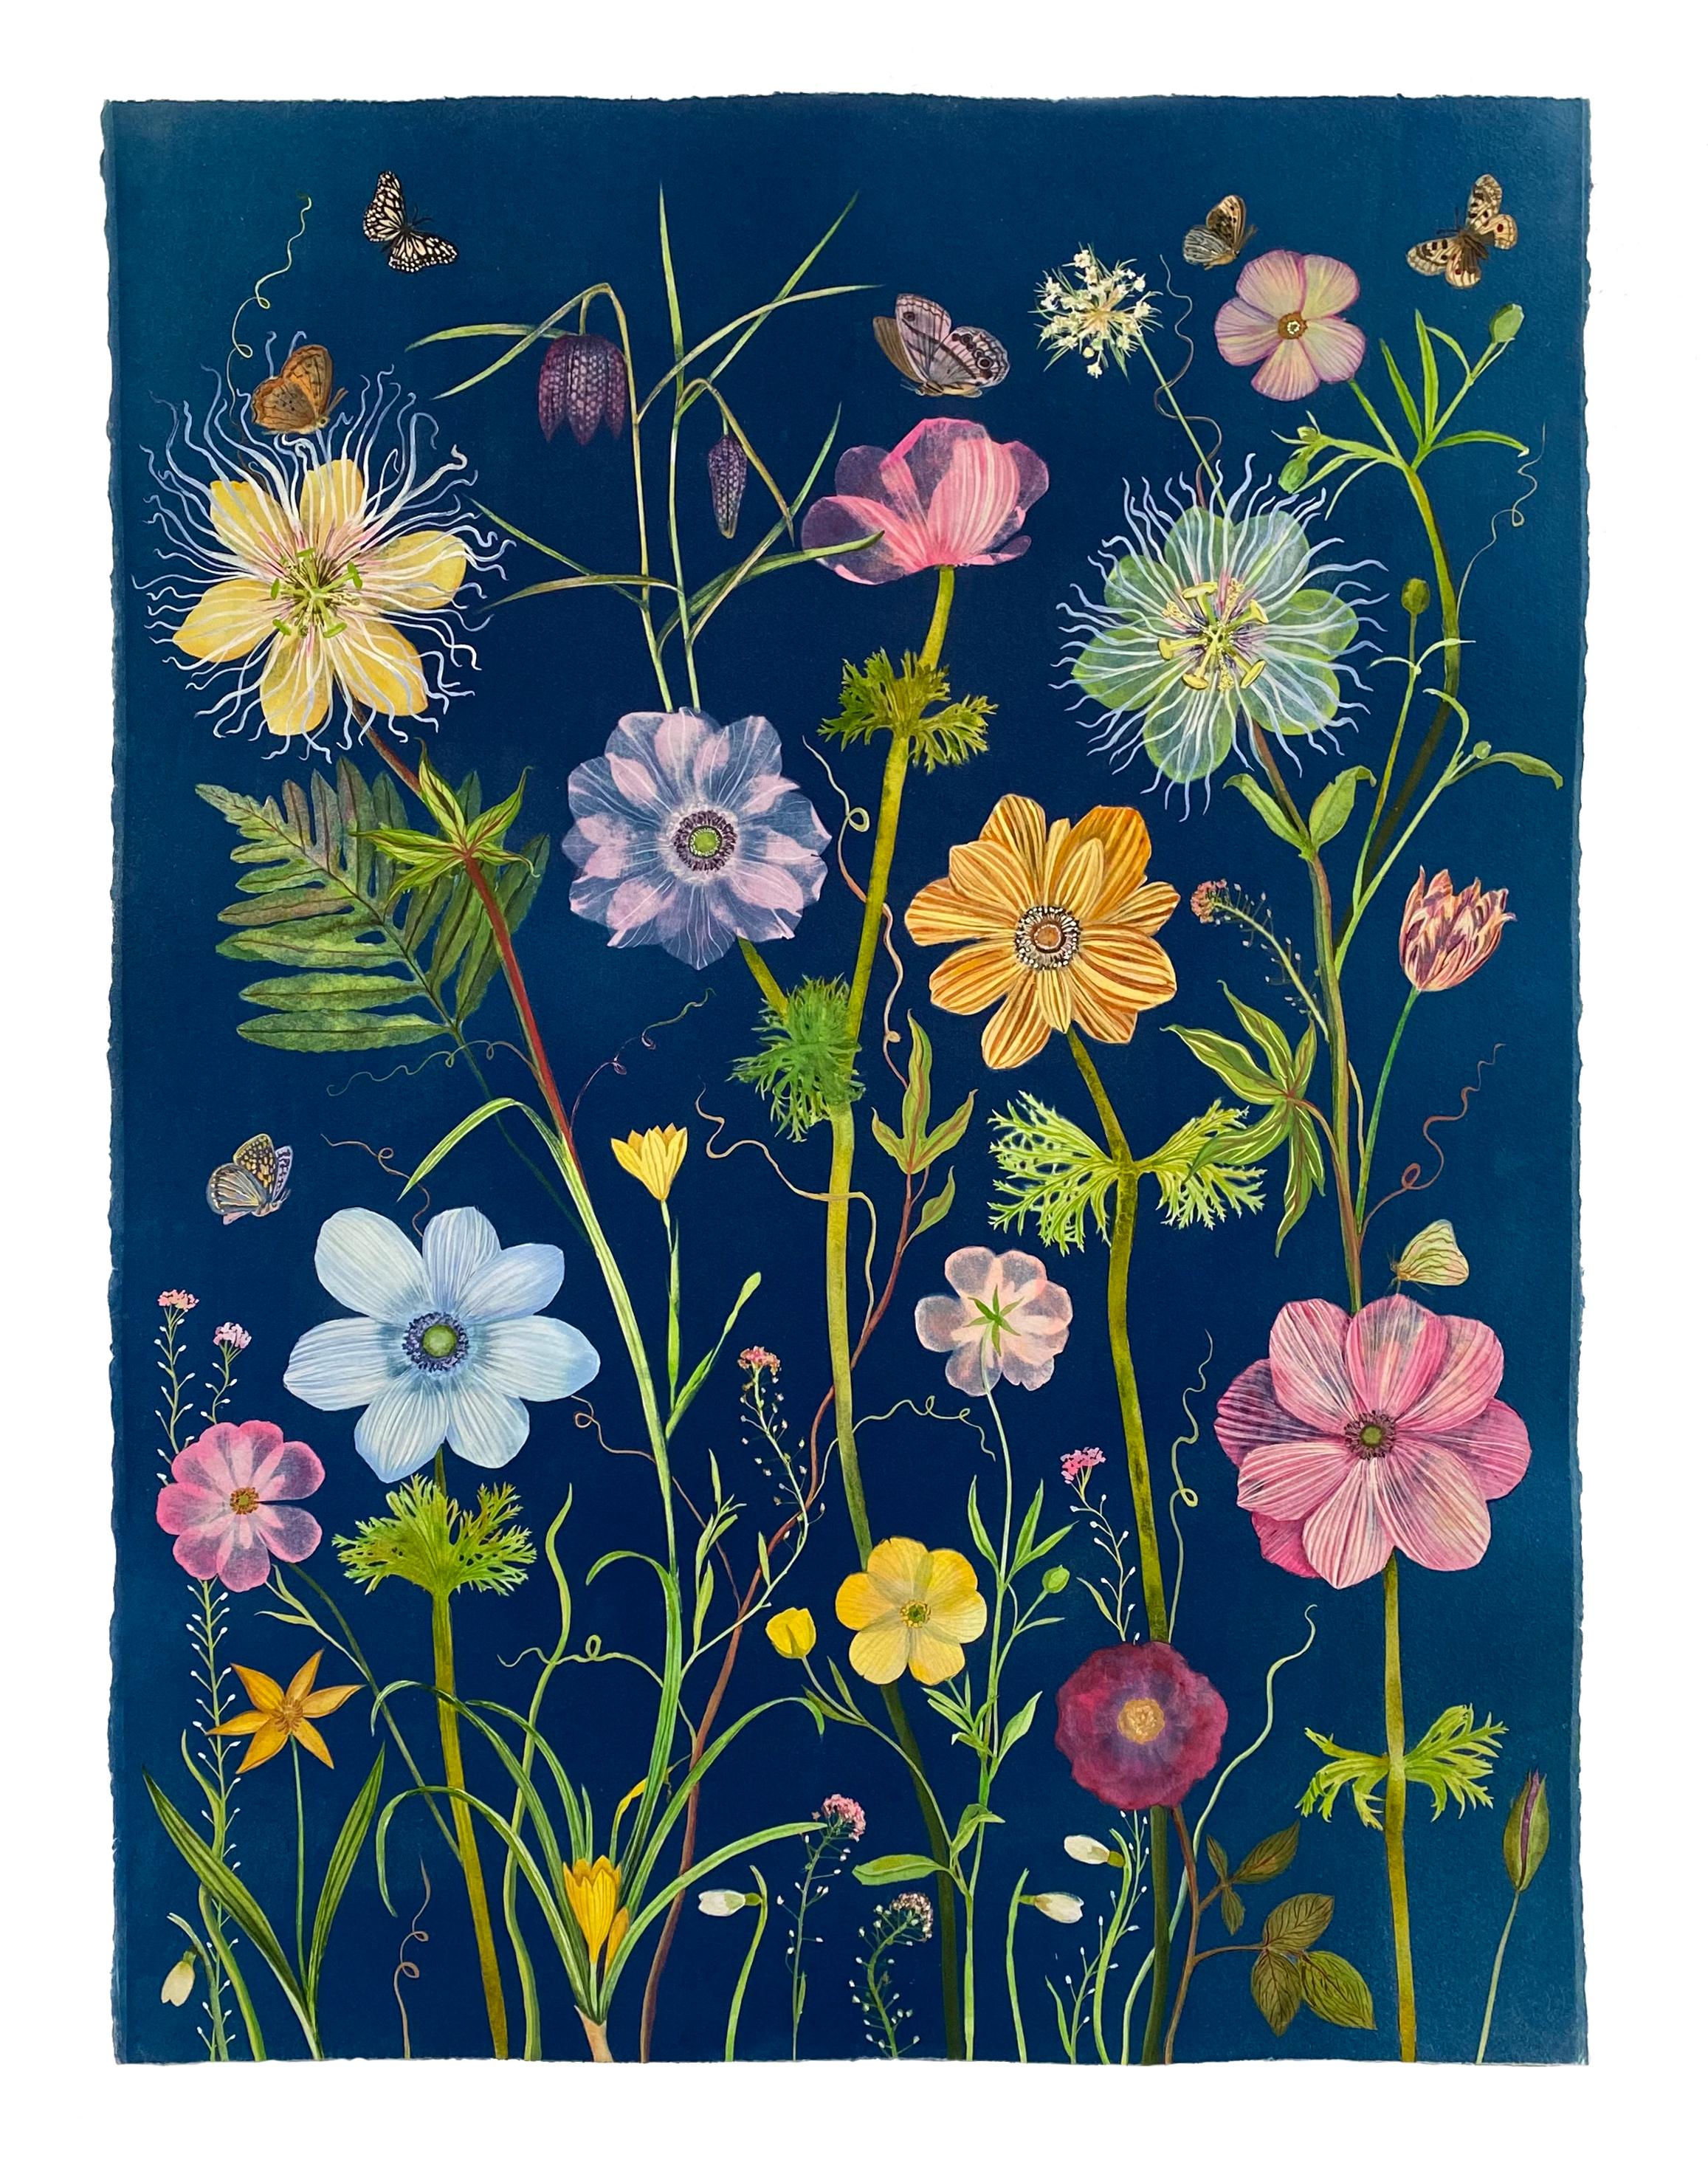 Realistic still life painting of pastel colored flowers on dark blue
Hand-painted cyanotype by Julia Whitney Barnes
